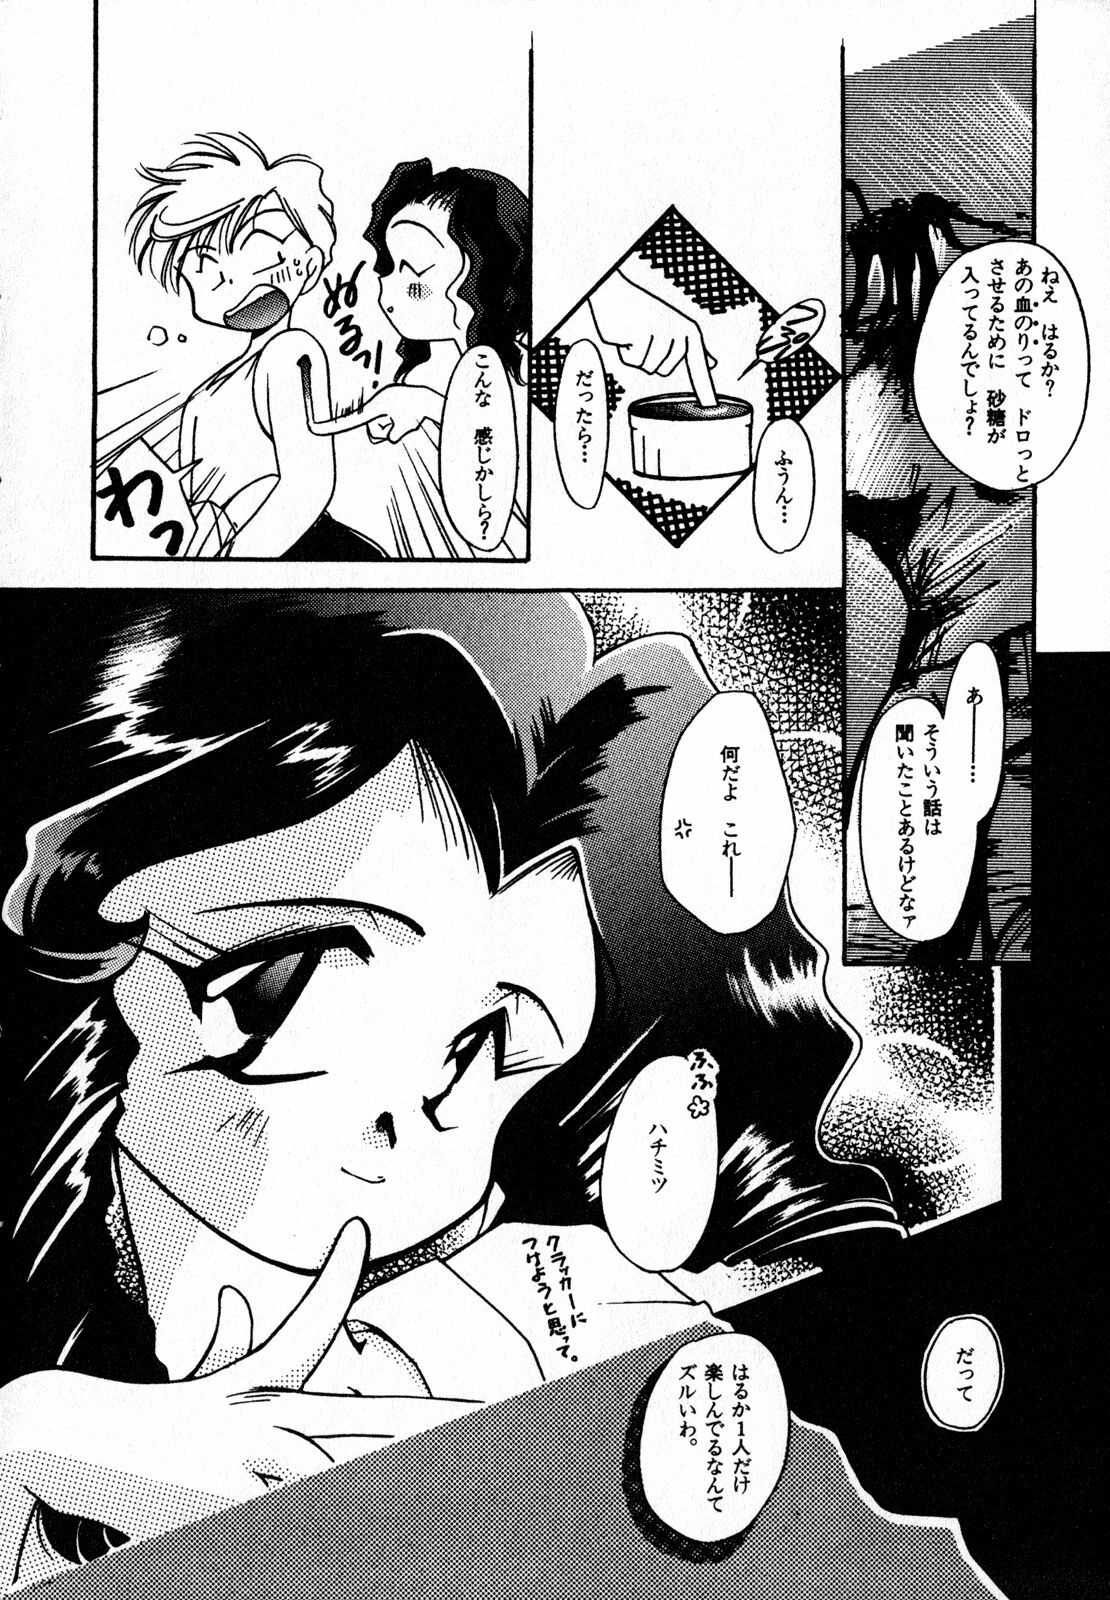 [Anthology] Lunatic Party 7 (Sailor Moon) page 19 full